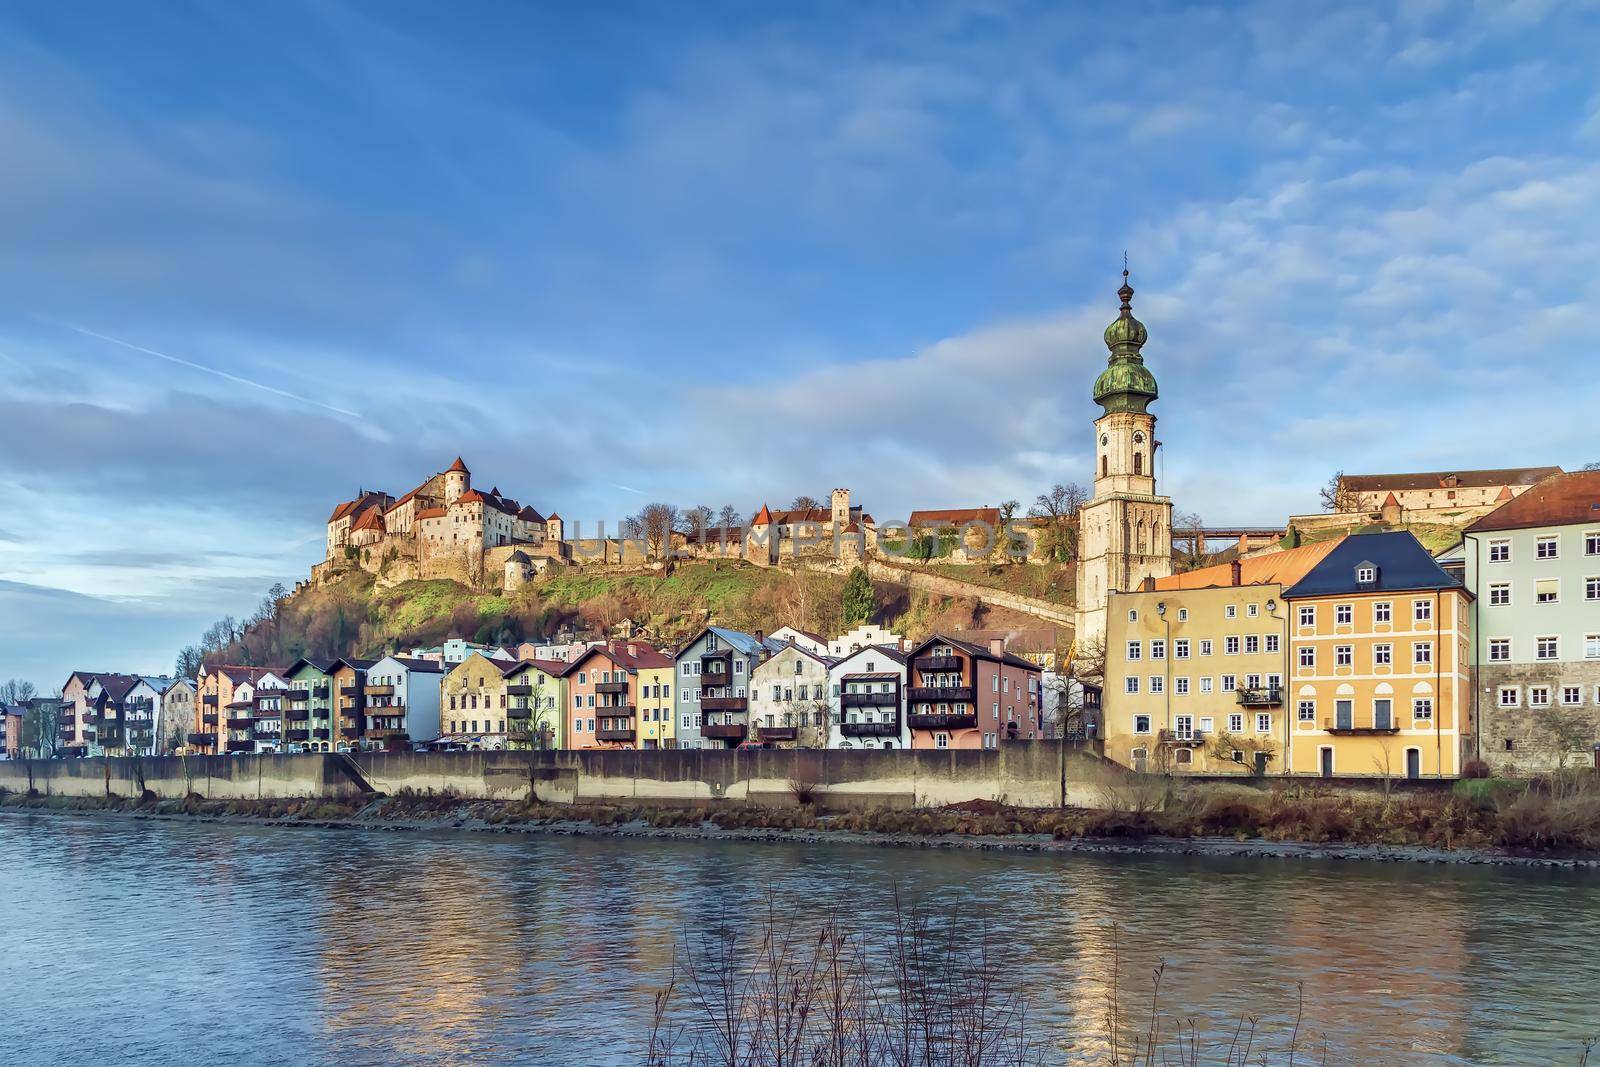 View of Burghausen, Germany by borisb17